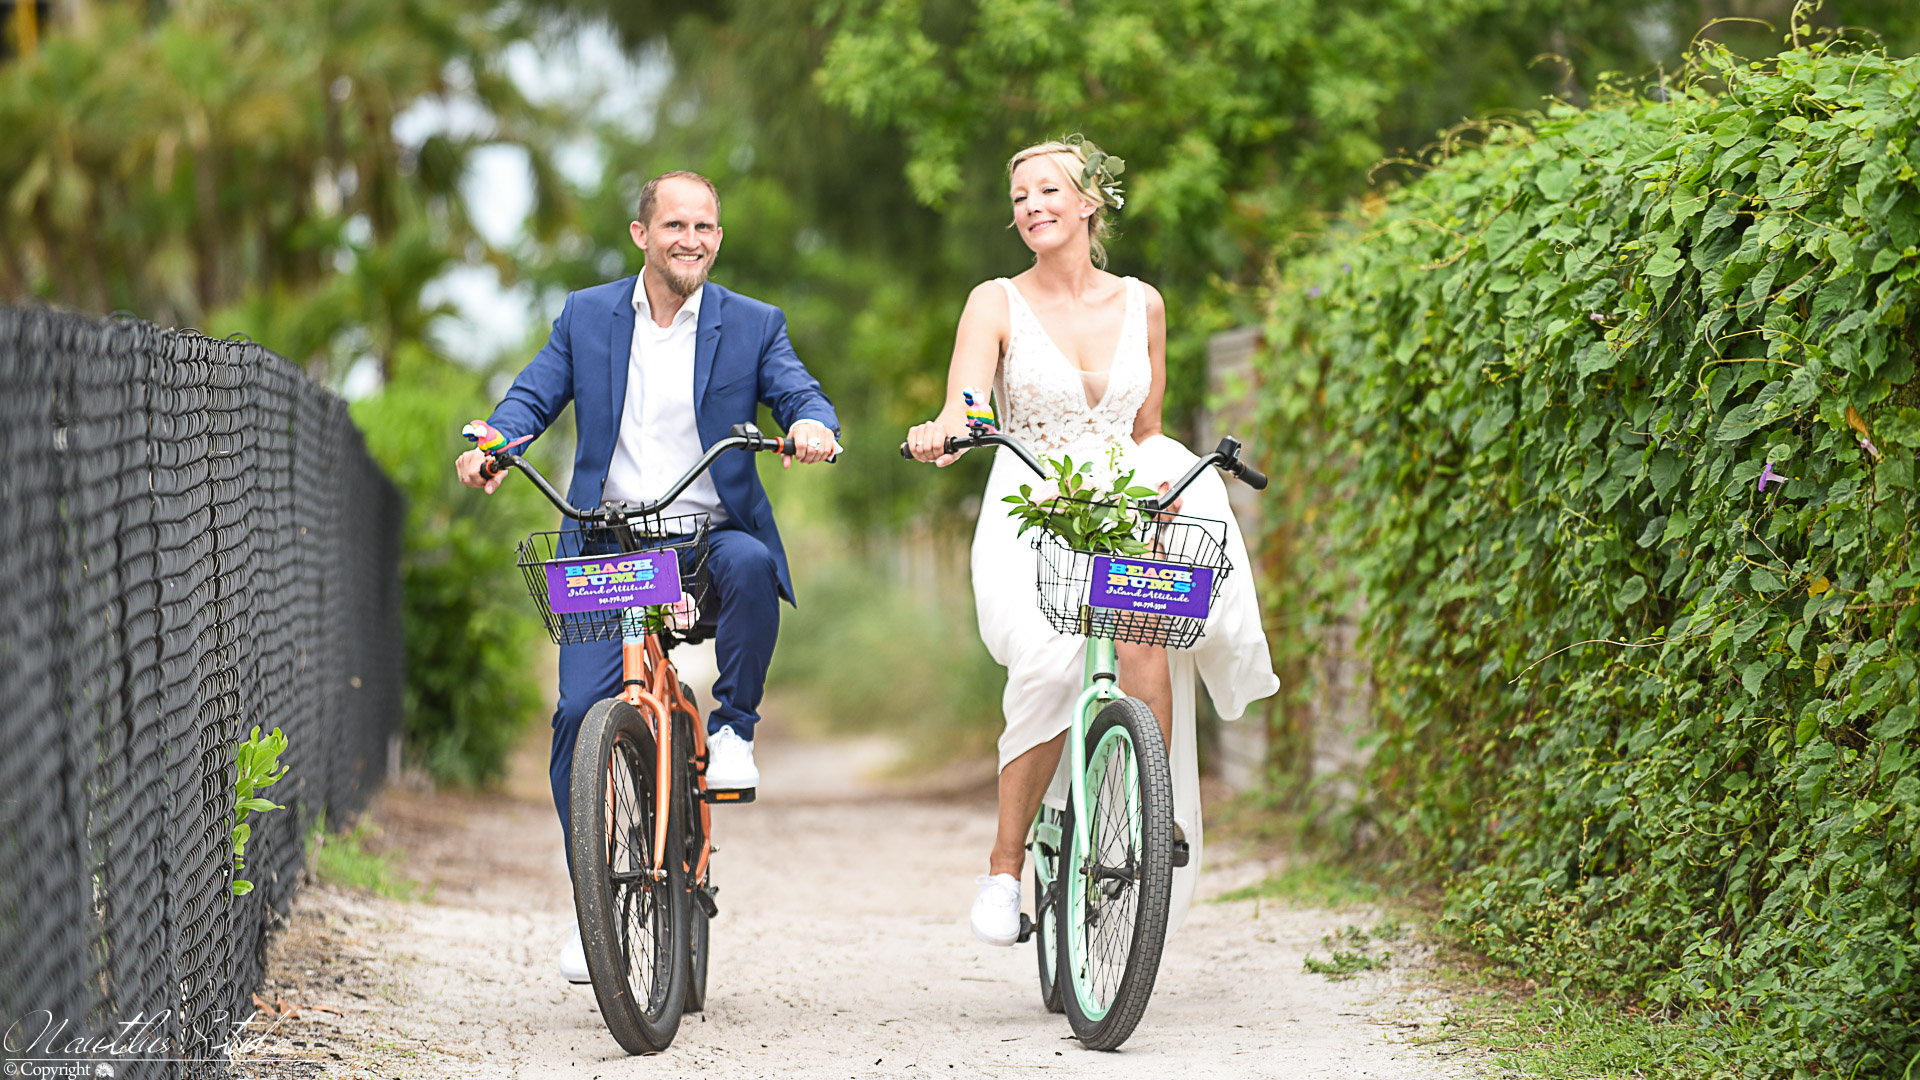 Photo showing bride and groom on a bicycle